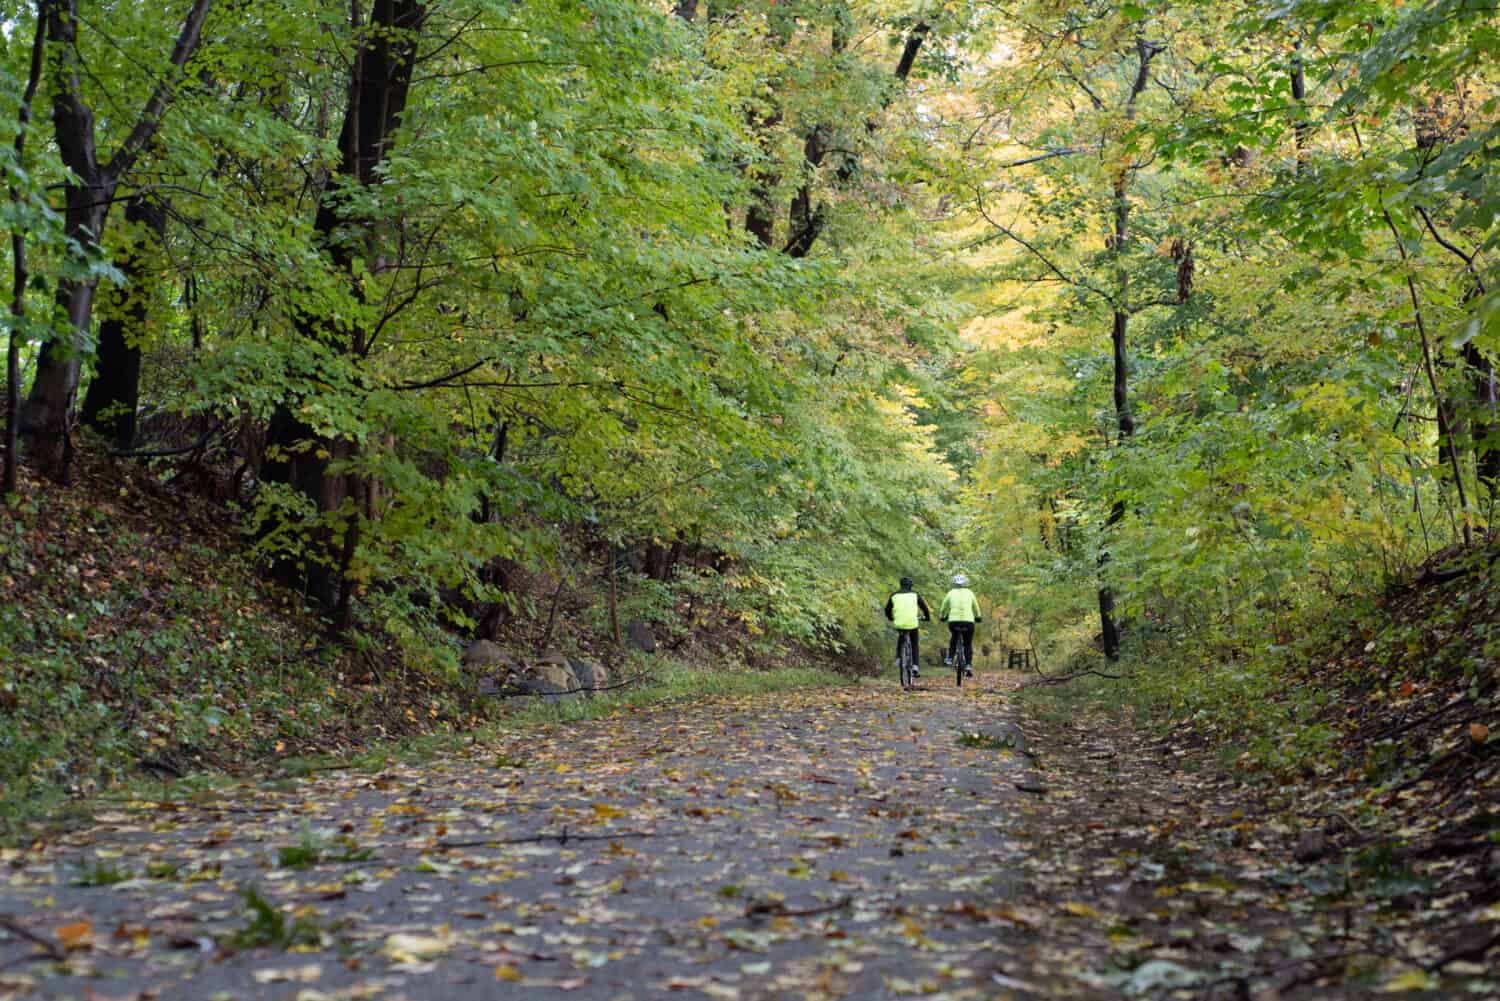 Two cyclists riding on the South County Trail near Ardsley, New York, USA on a wet autumn day.